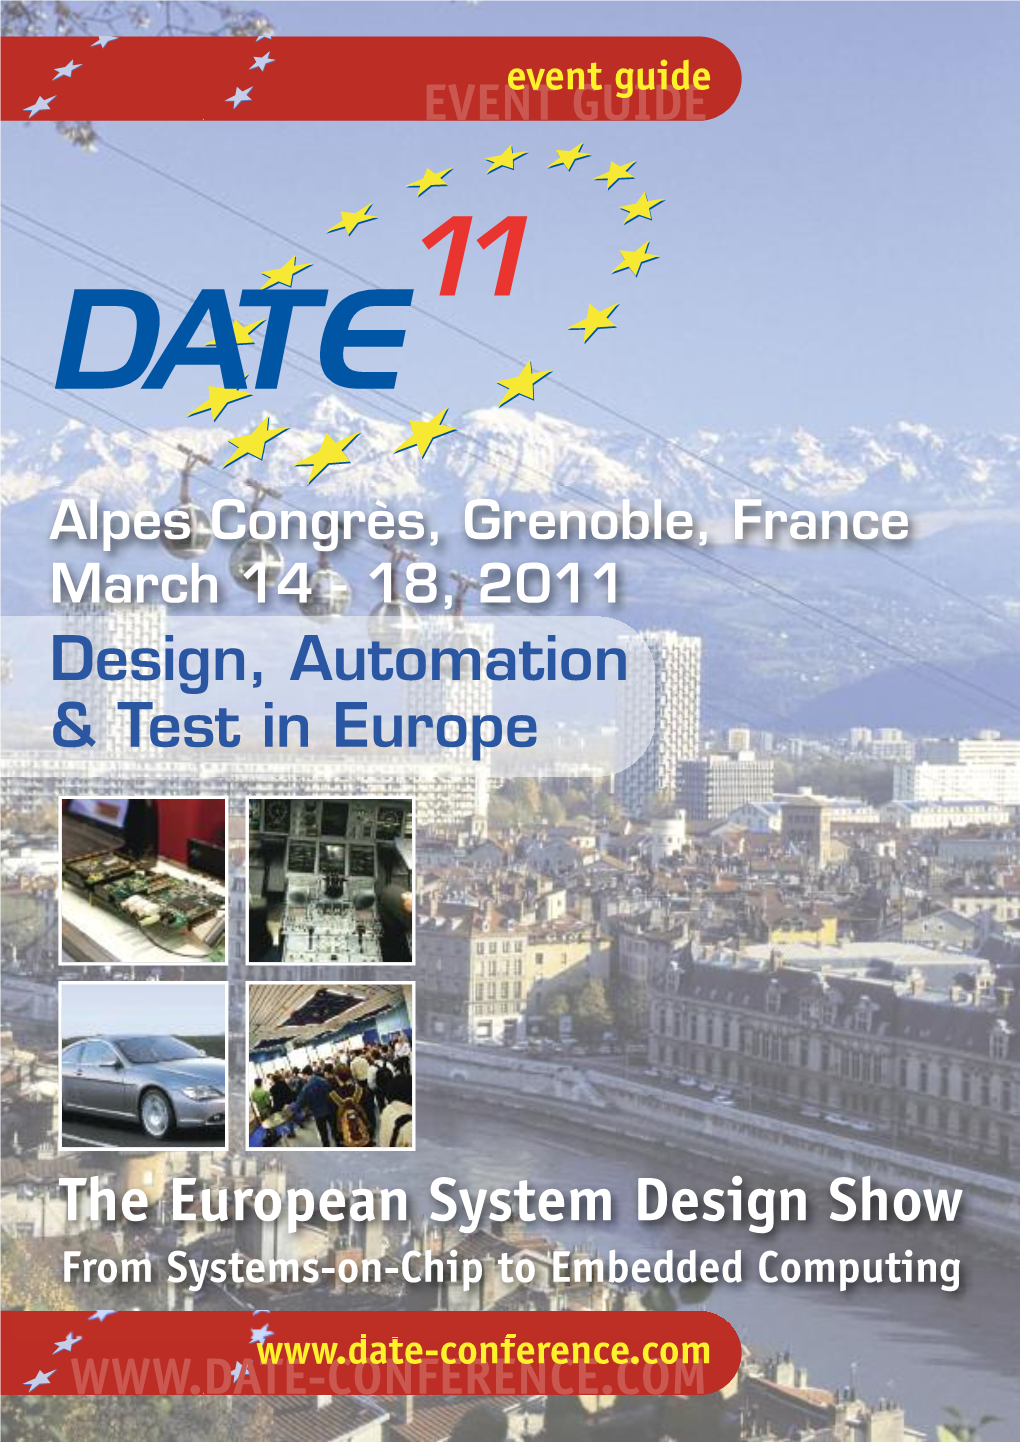 The European System Design Show from Systems-On-Chip to Embedded Computing